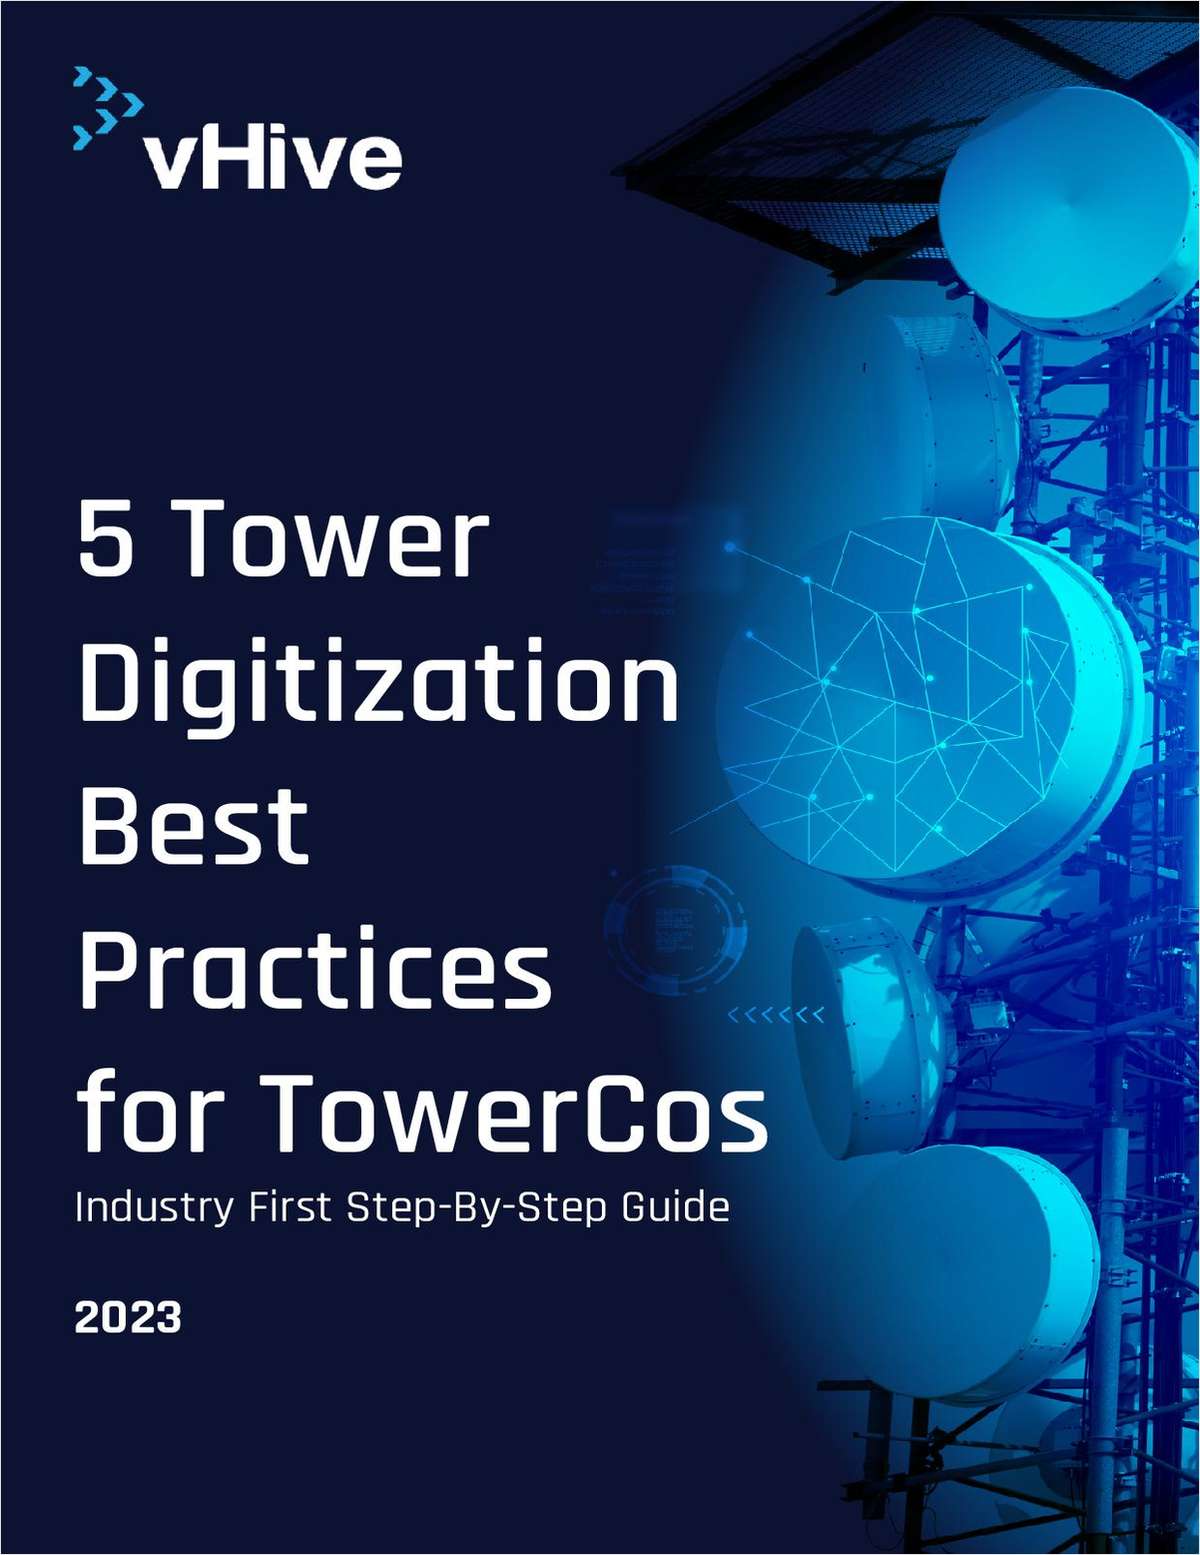 Tower Digitization Best Practices for TowerCos  Industry first step-by-step guide